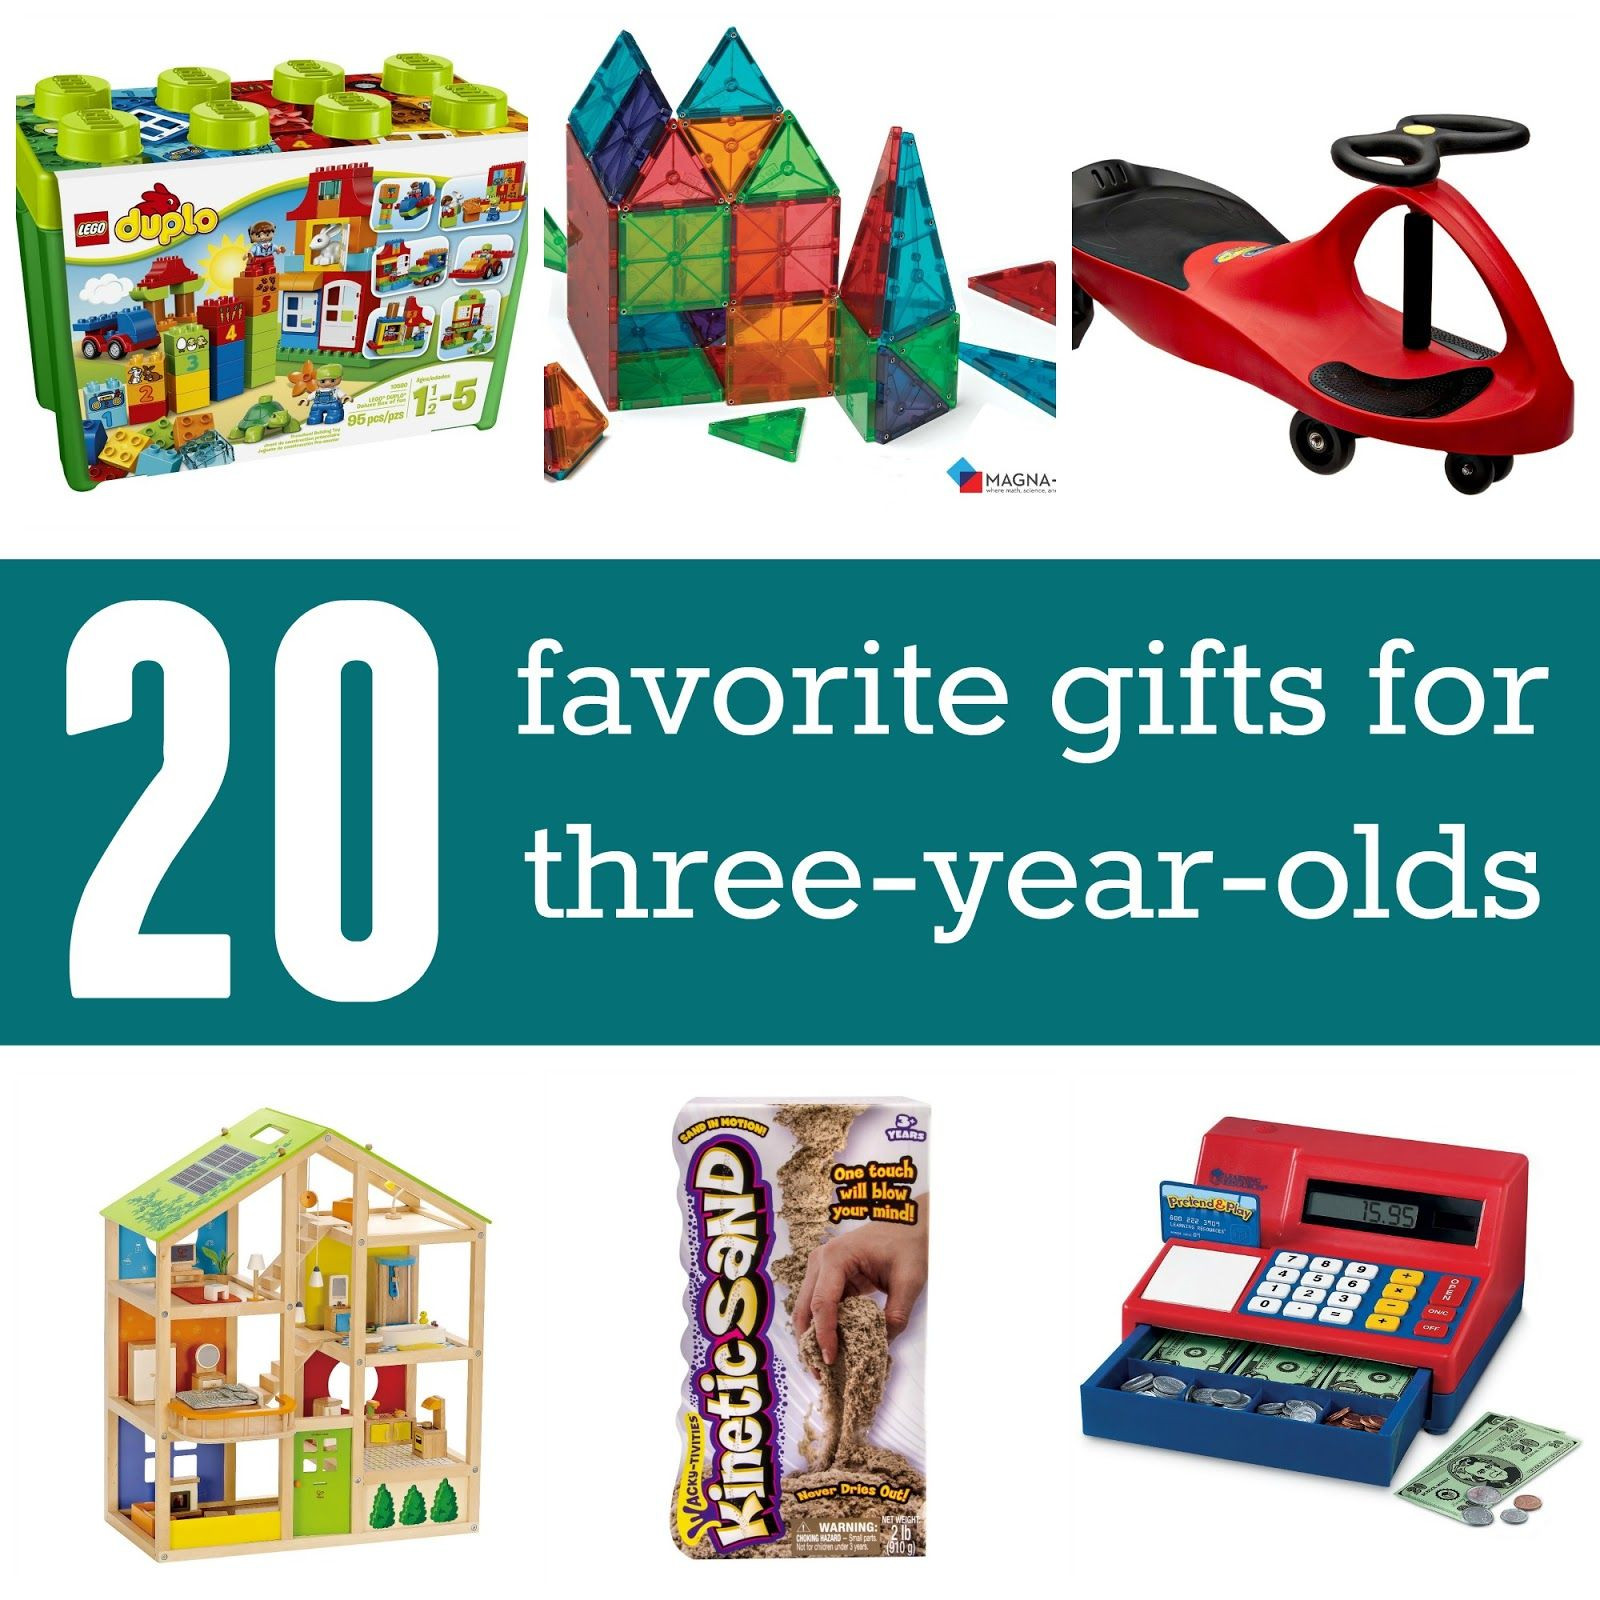 Gift Ideas For 3 Year Old Boys
 Favorite Gifts for 3 year olds Therapy ideas